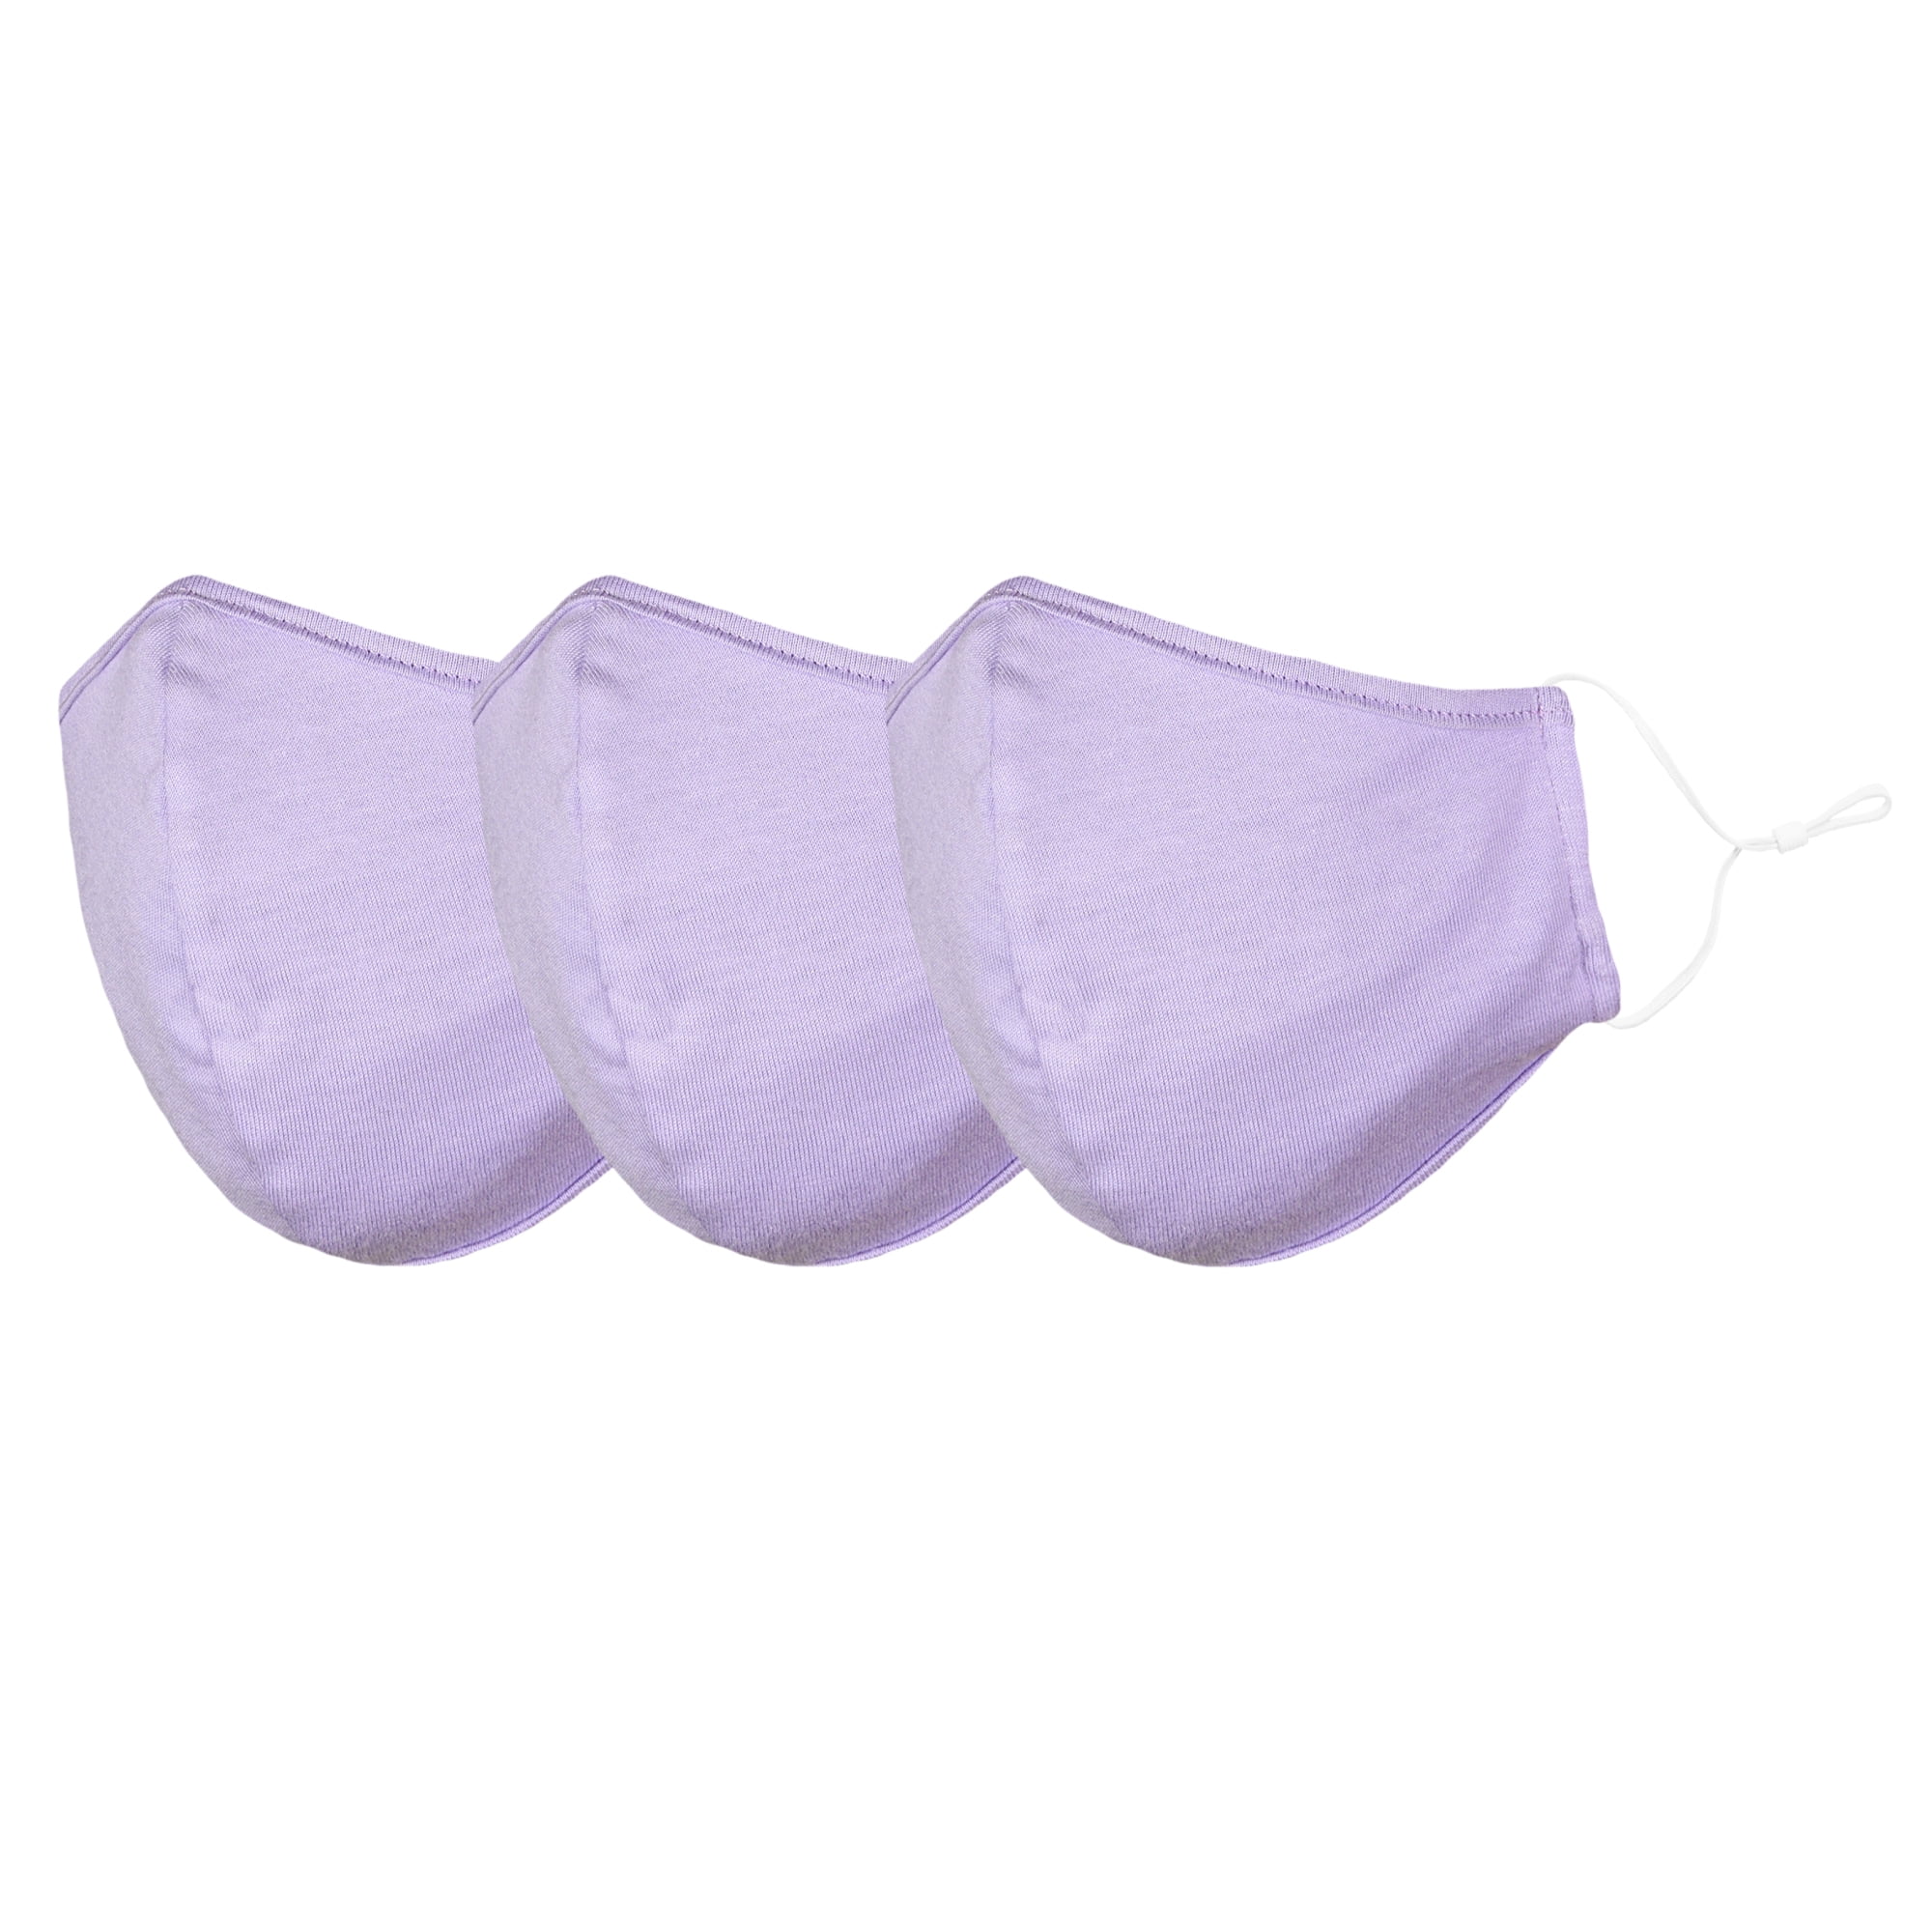 DALIX - DALIX Kids Cotton Face Mask Reuseable Washable in Lavender Made in USA - XXS-XS Size 3 Pack